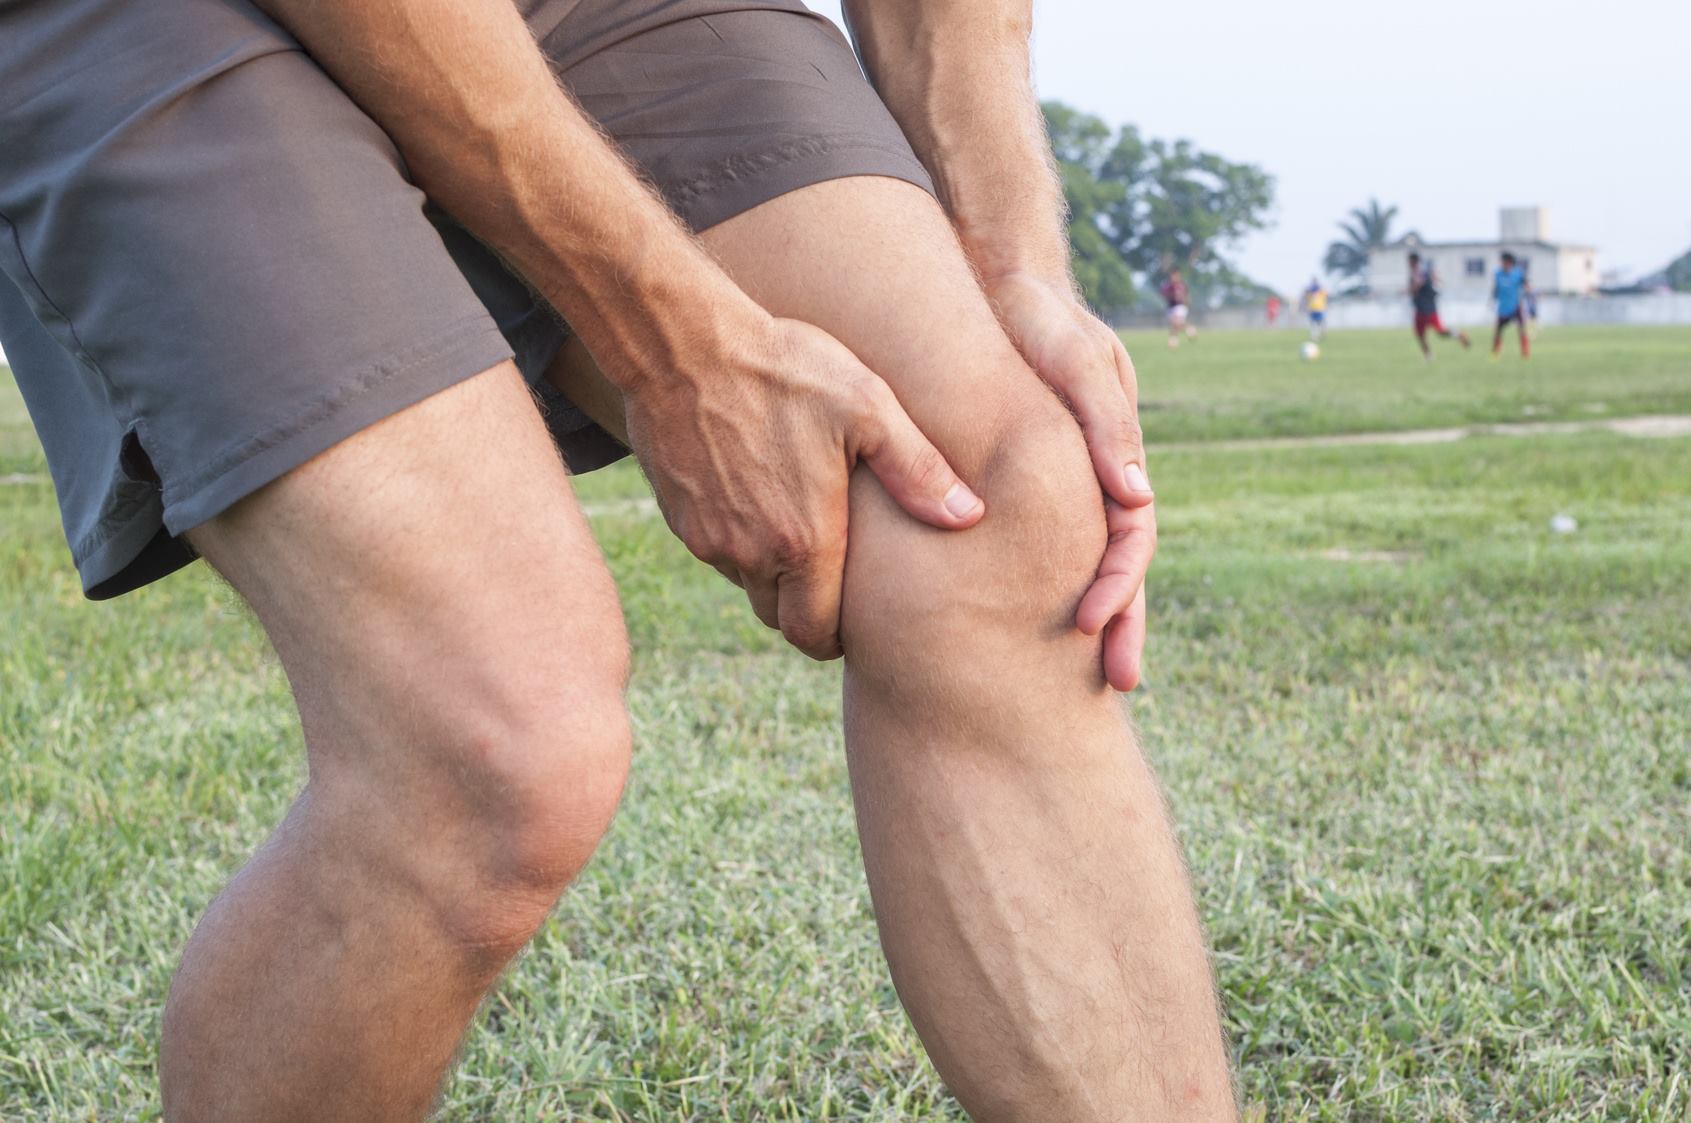 In the United States, more than 500,000 knee replacements and 175,000 hip replacements are performed each year.